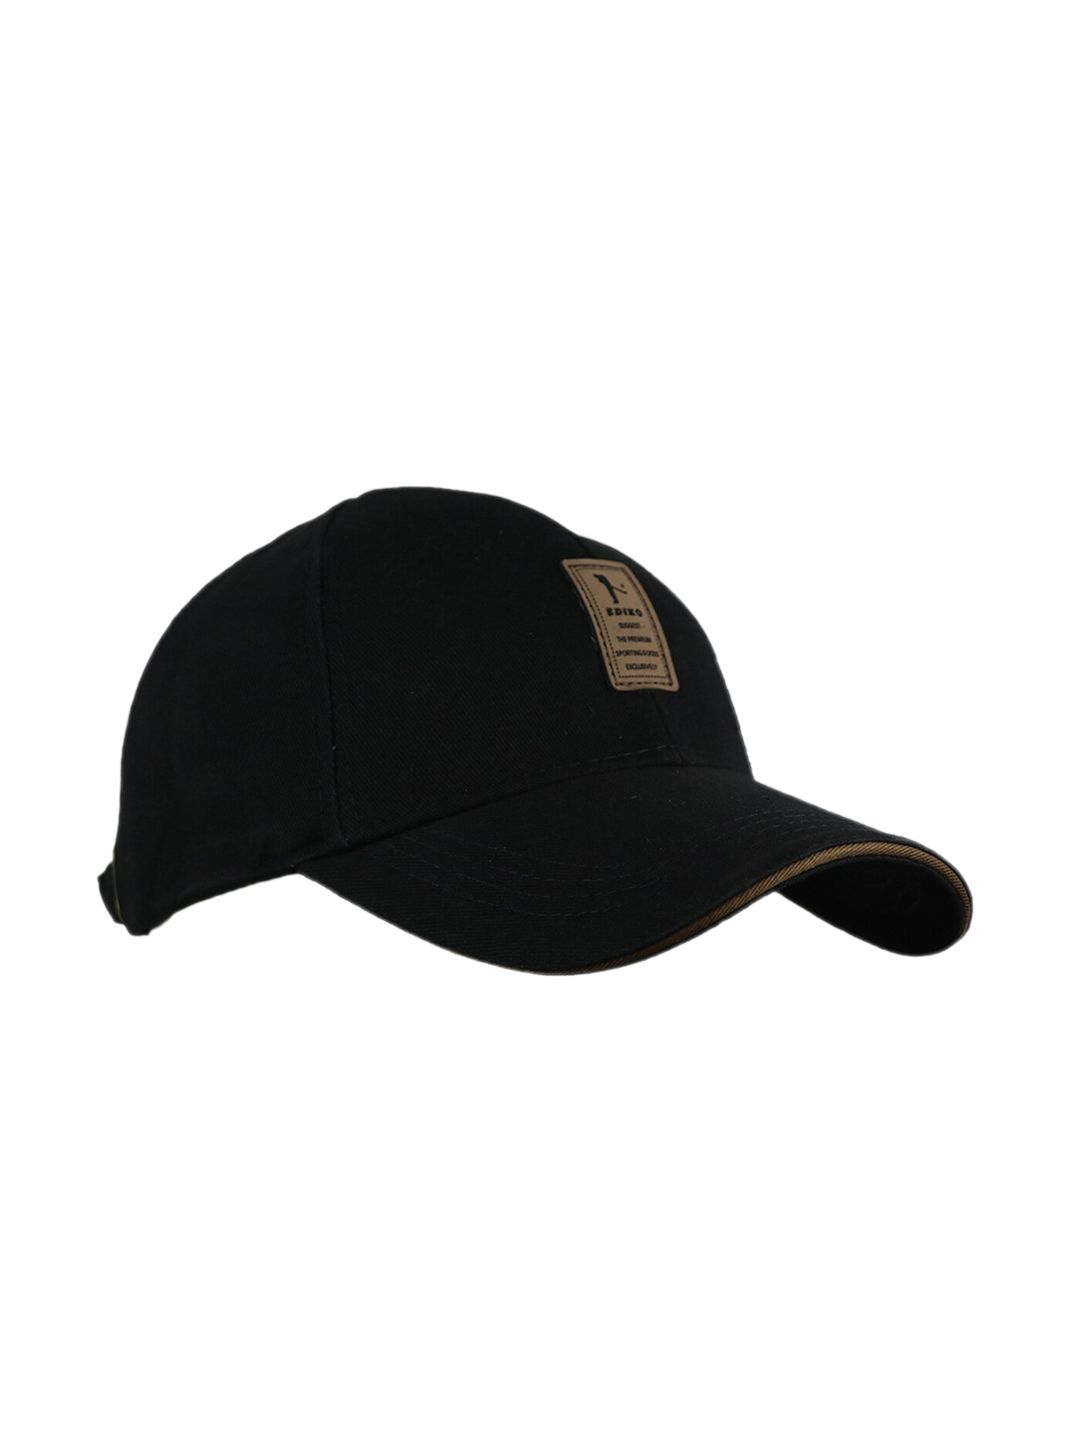 iSWEVEN Unisex Black Solid Snapback Cap Price in India